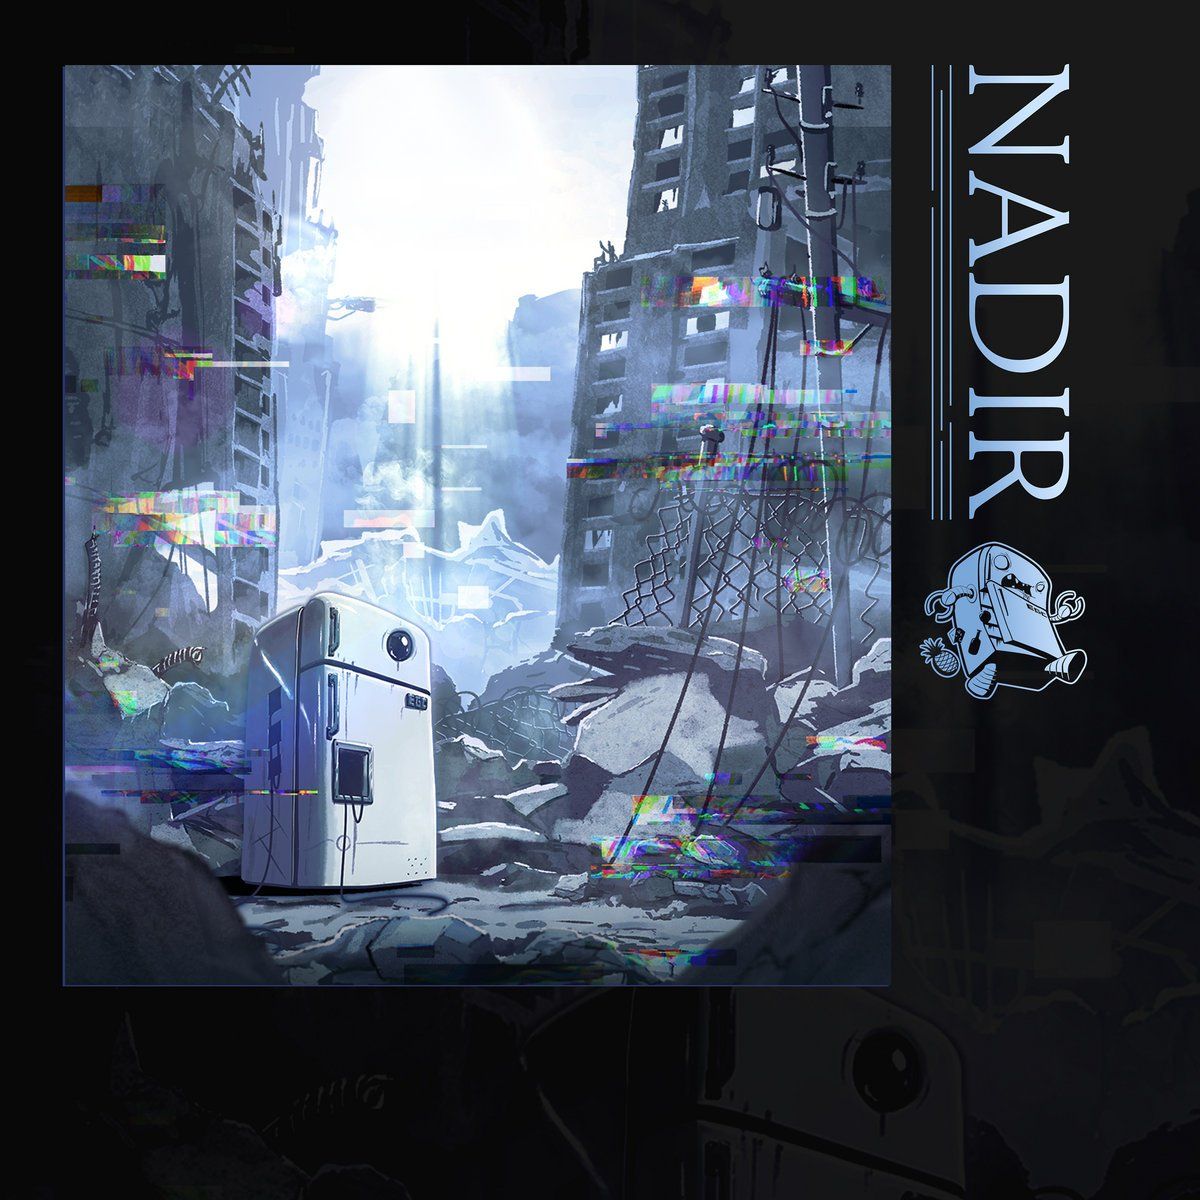 Everything Goes Cold Return With the Video for Their Icy Industrial Darkwave Single “Nadir”